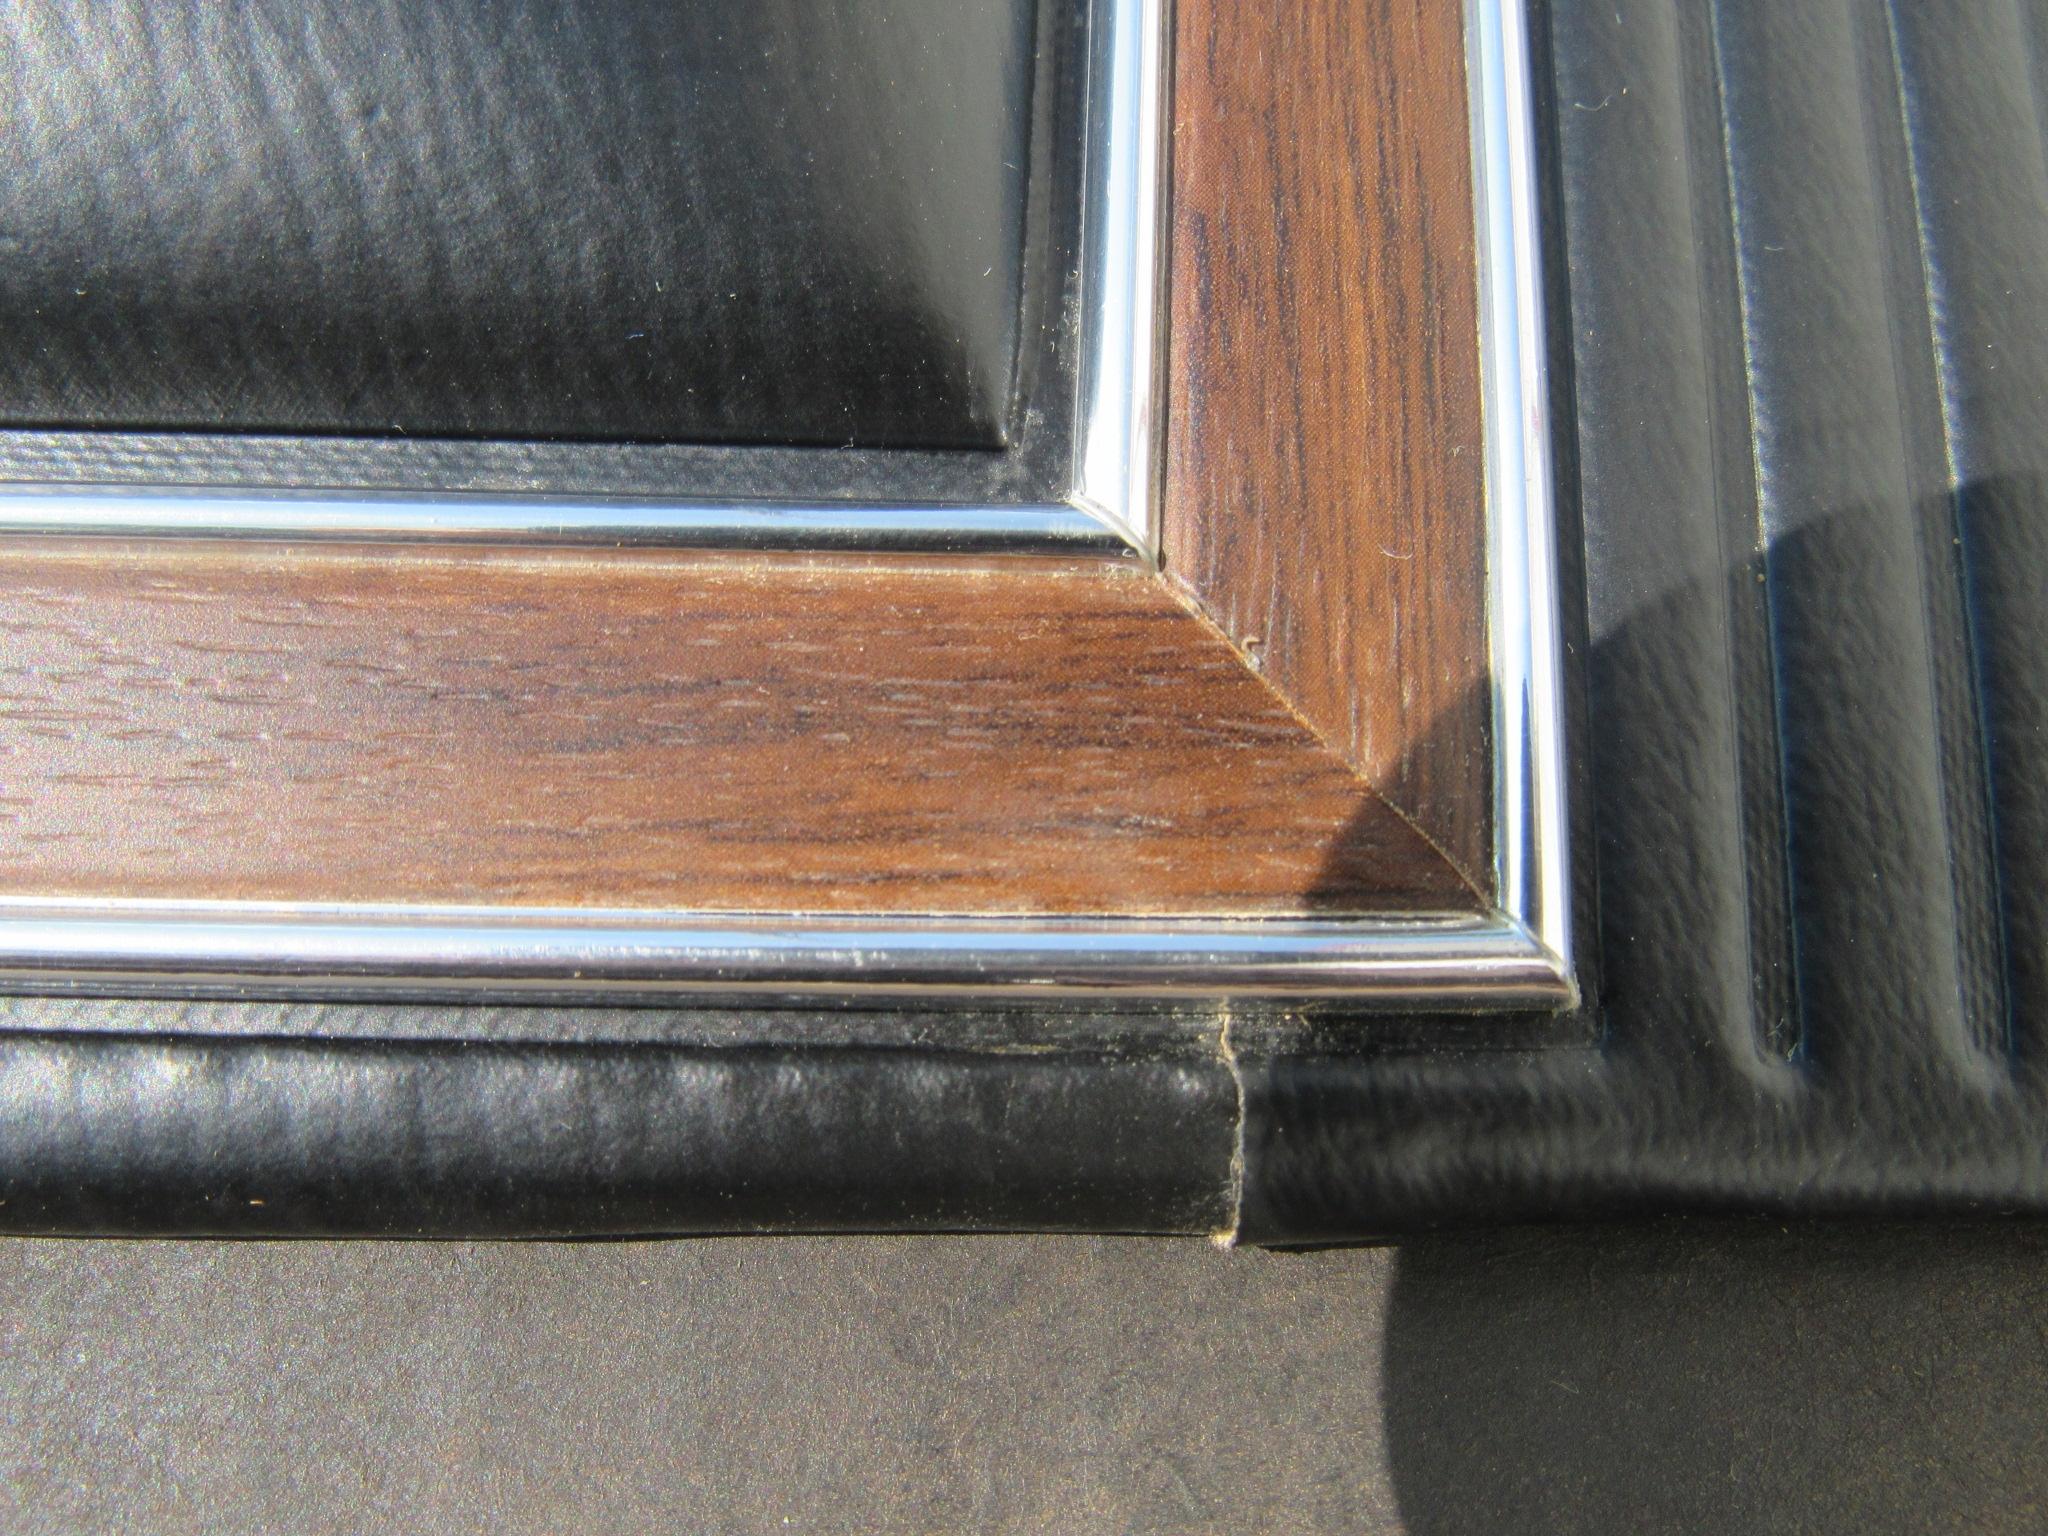 the wood grain overlay in excellent